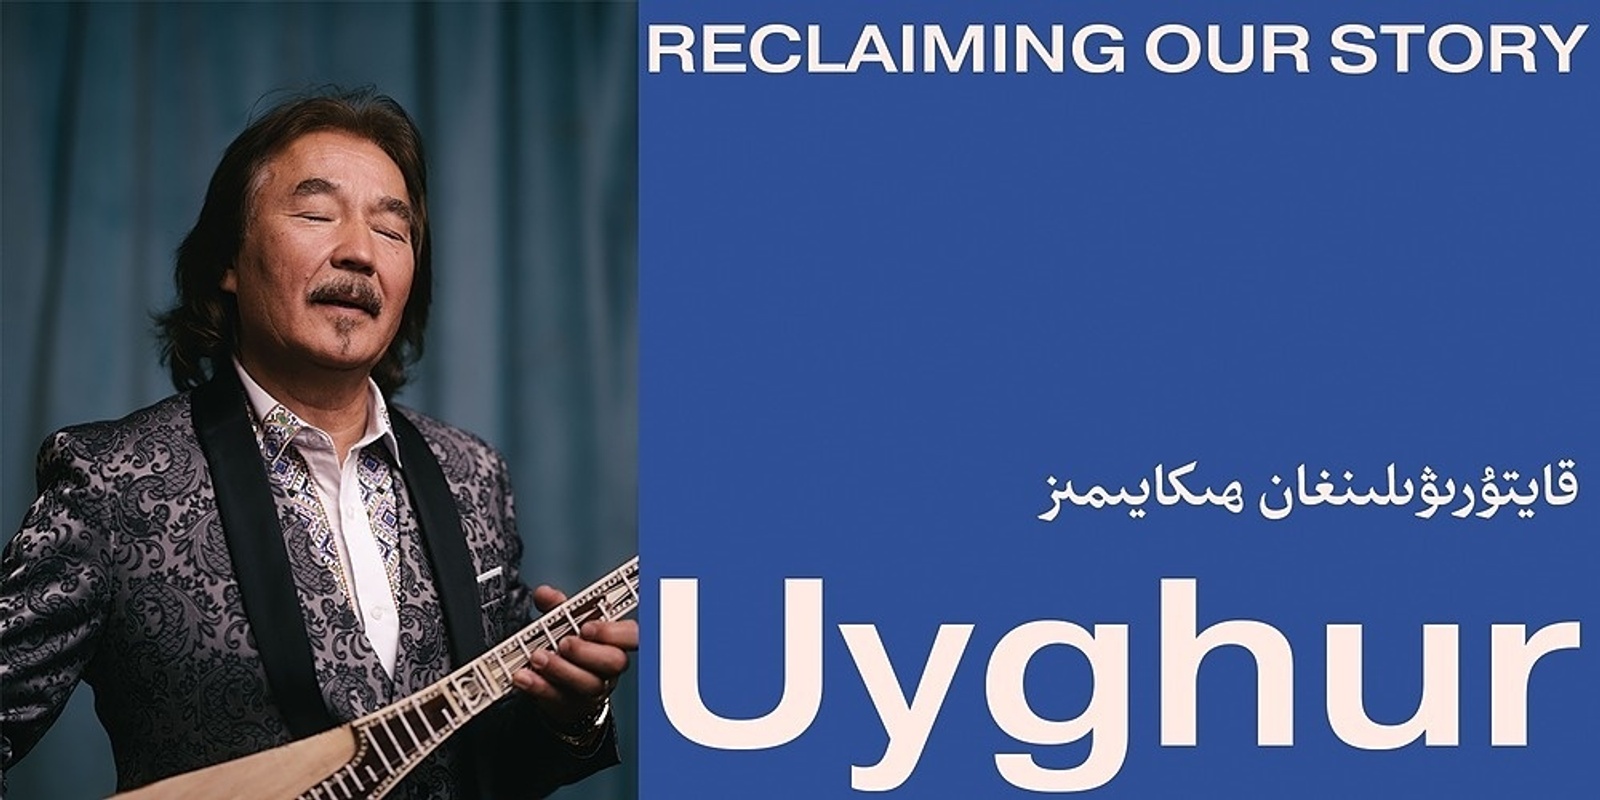 'Uyghur – Reclaiming our story' Exhibition